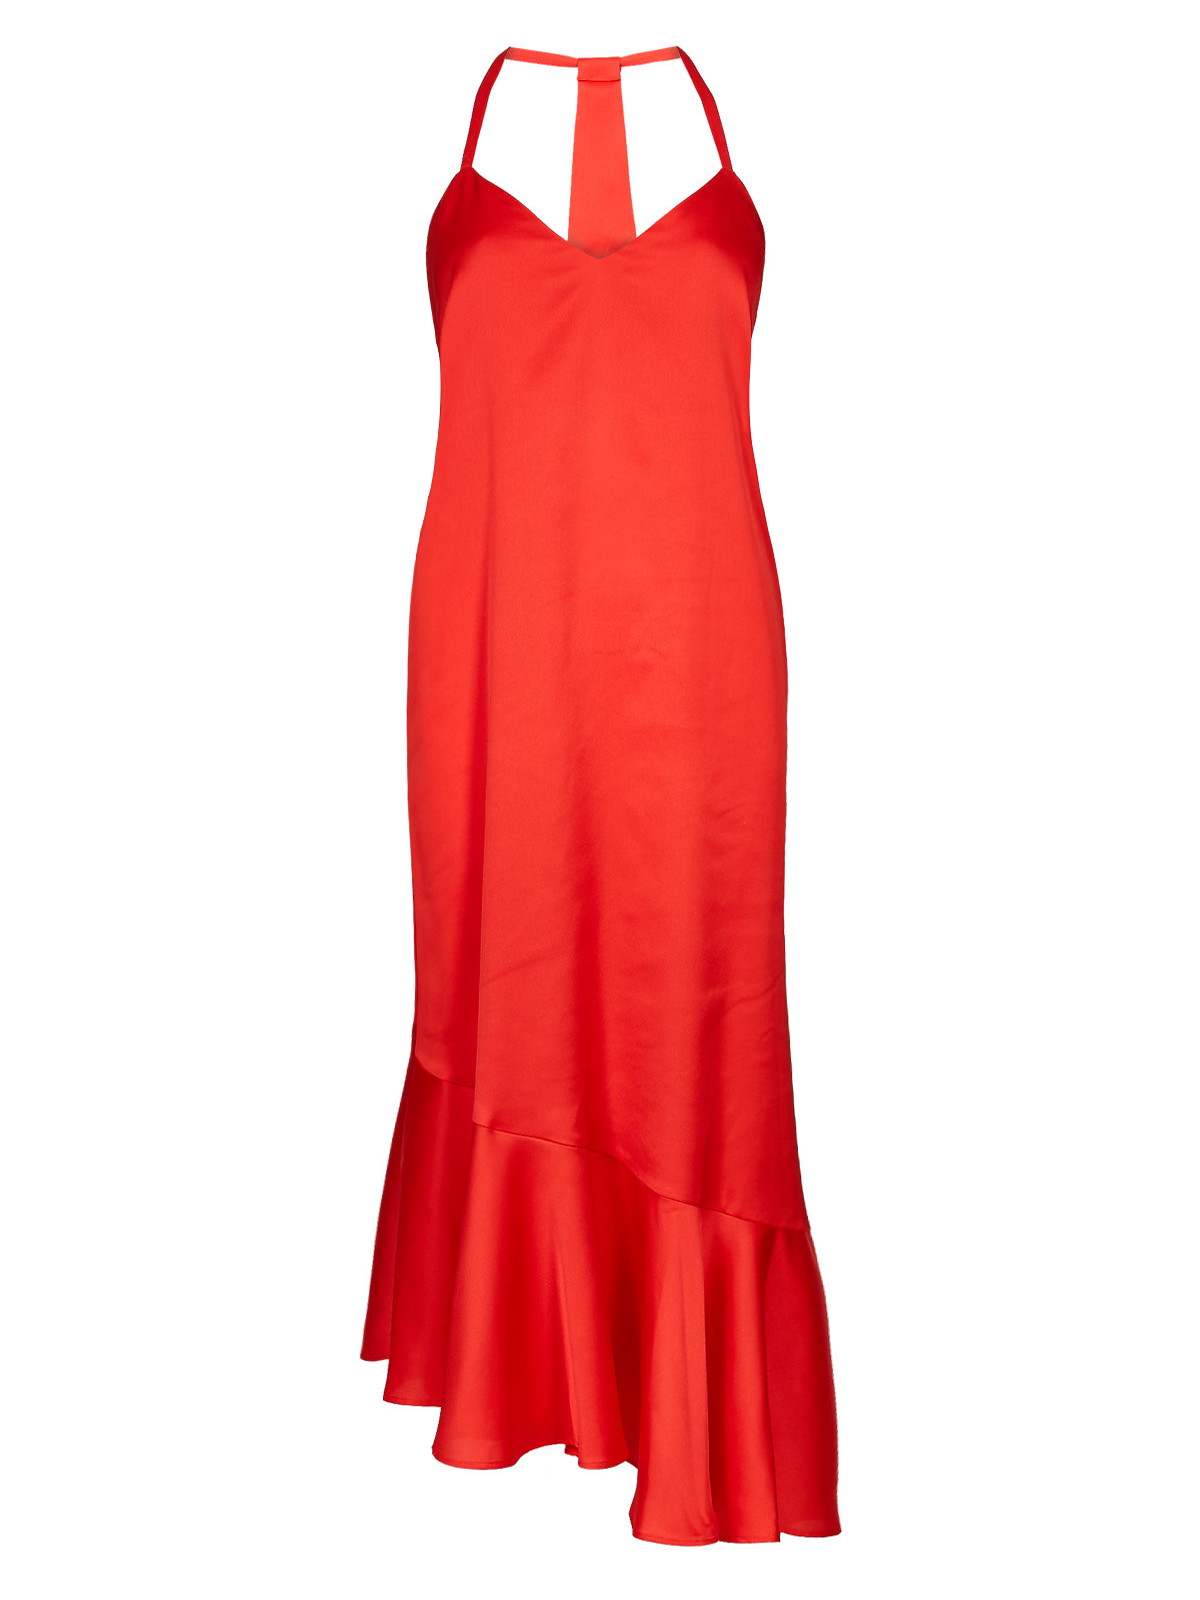 Marks and Spencer - - M&5 RED Asymmetric Slip Midi Dress - Size 8 to 22